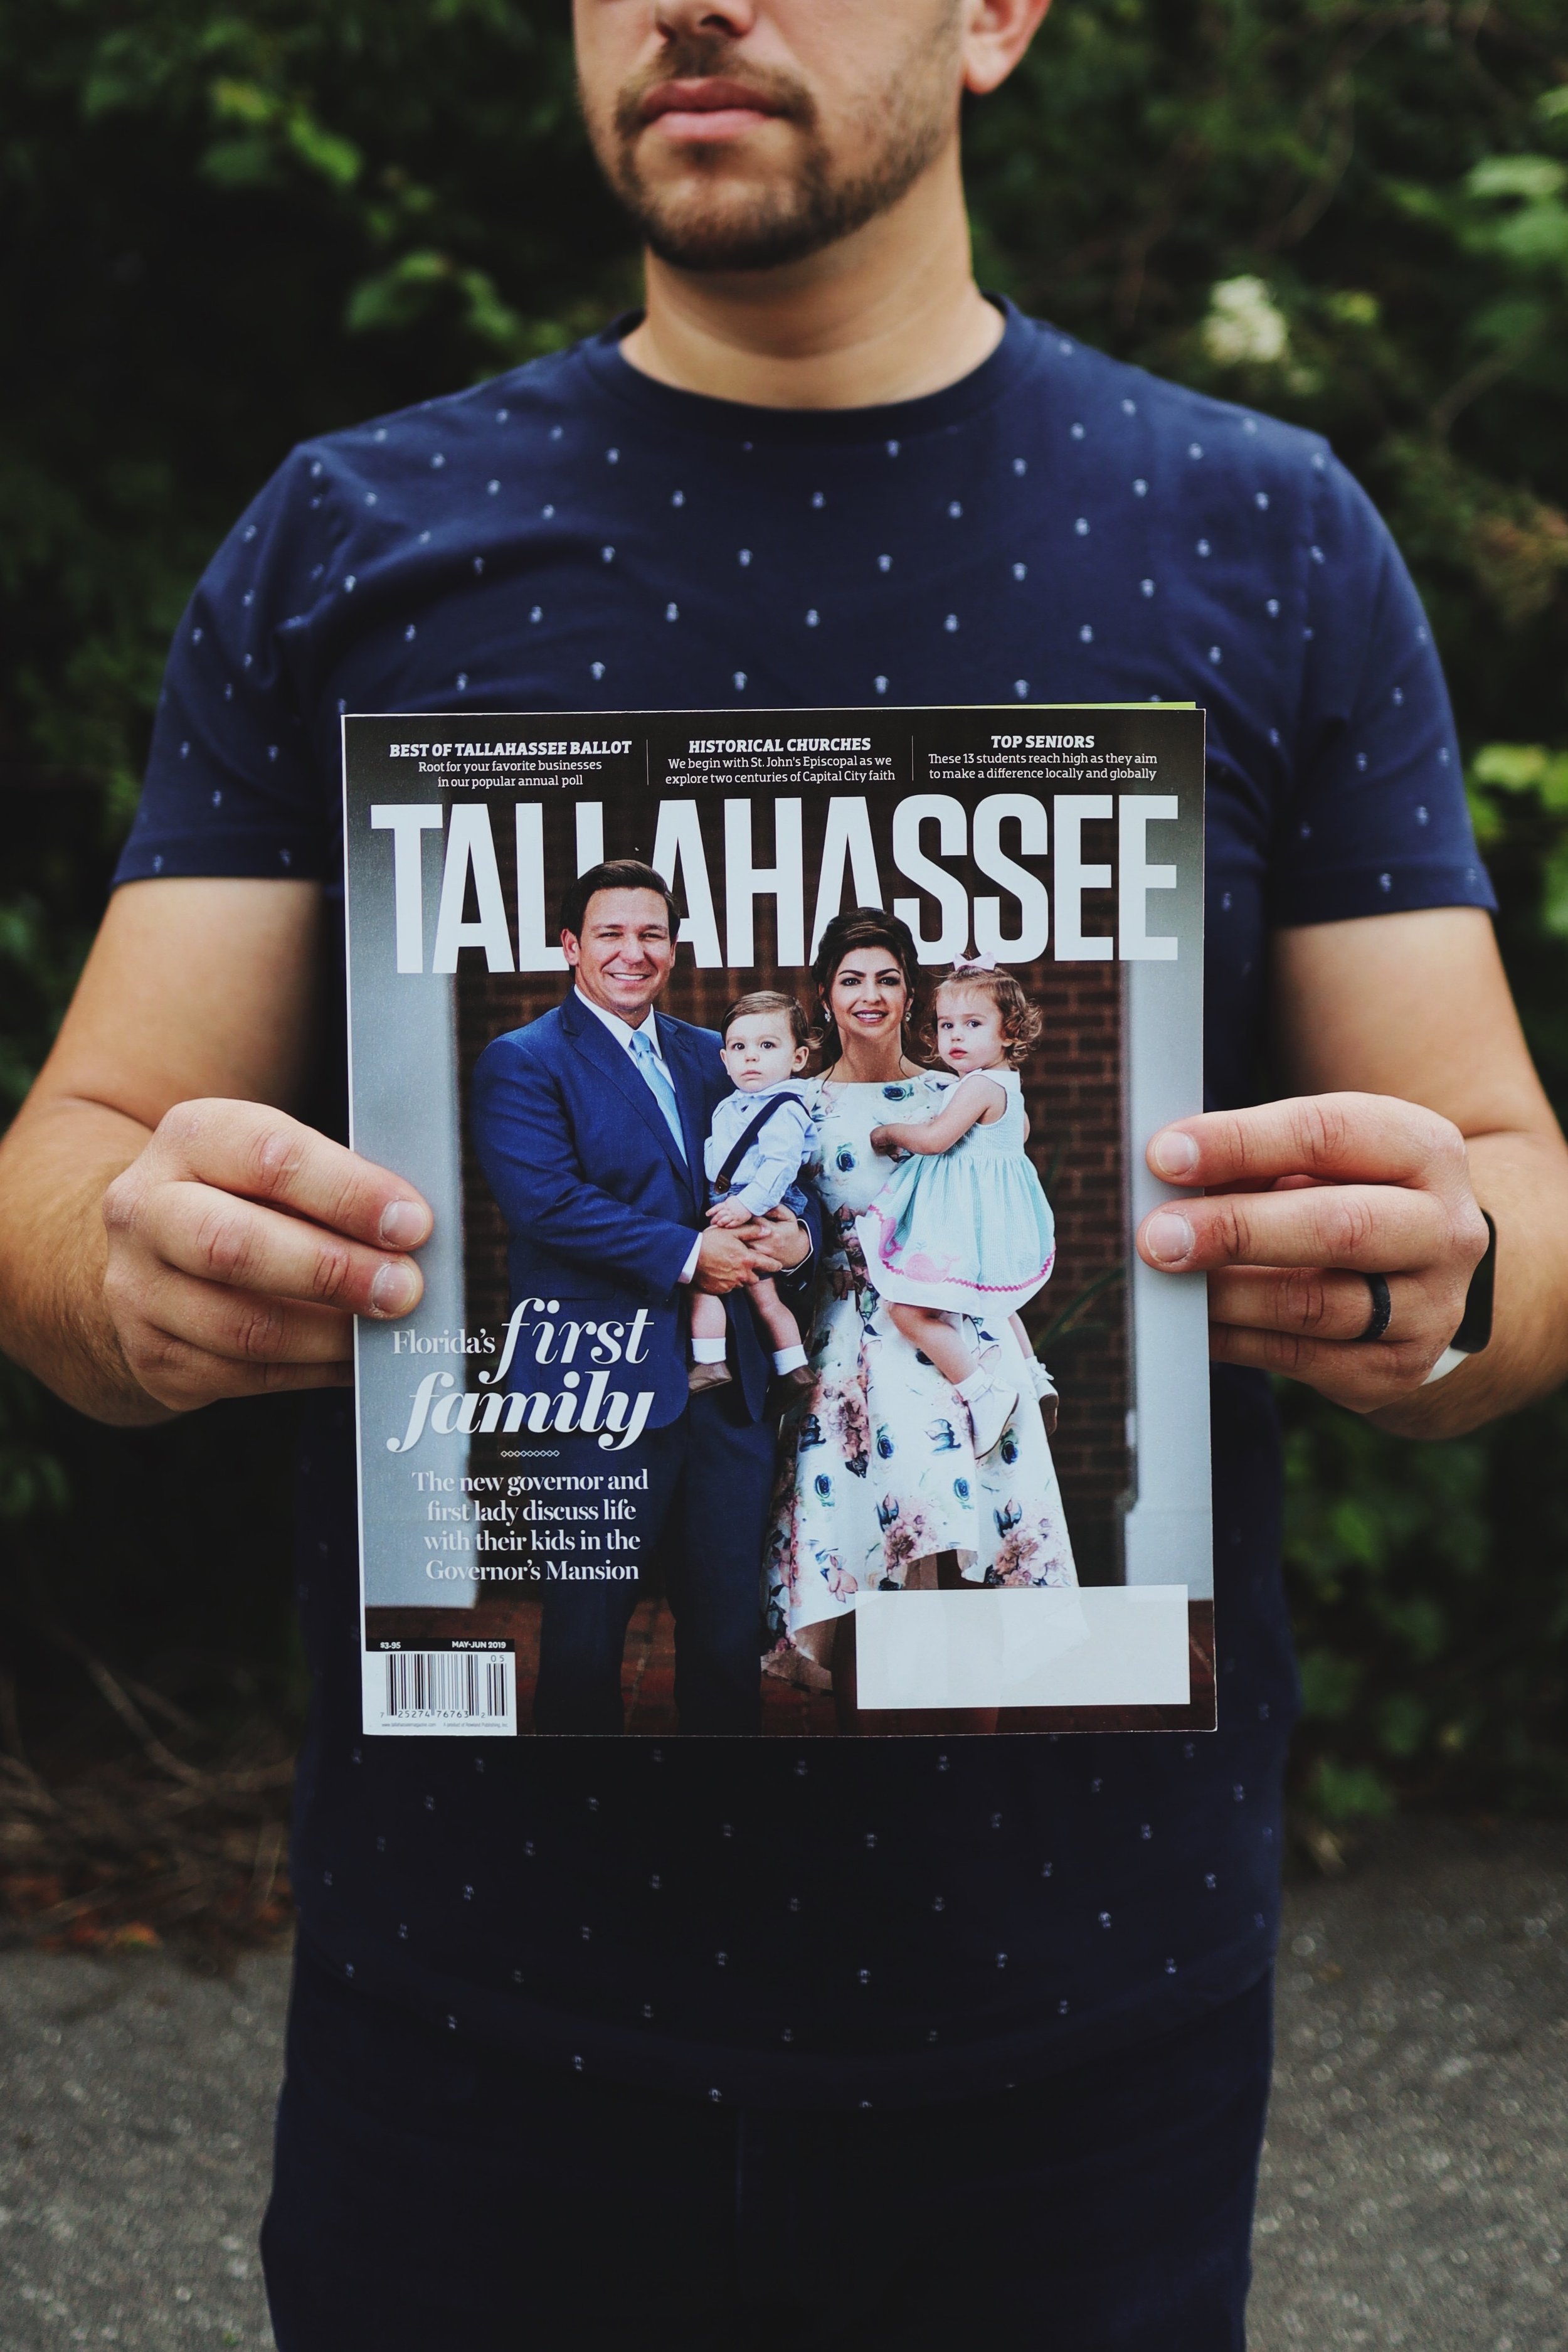 Florida's First Family // Tallahassee Magazine